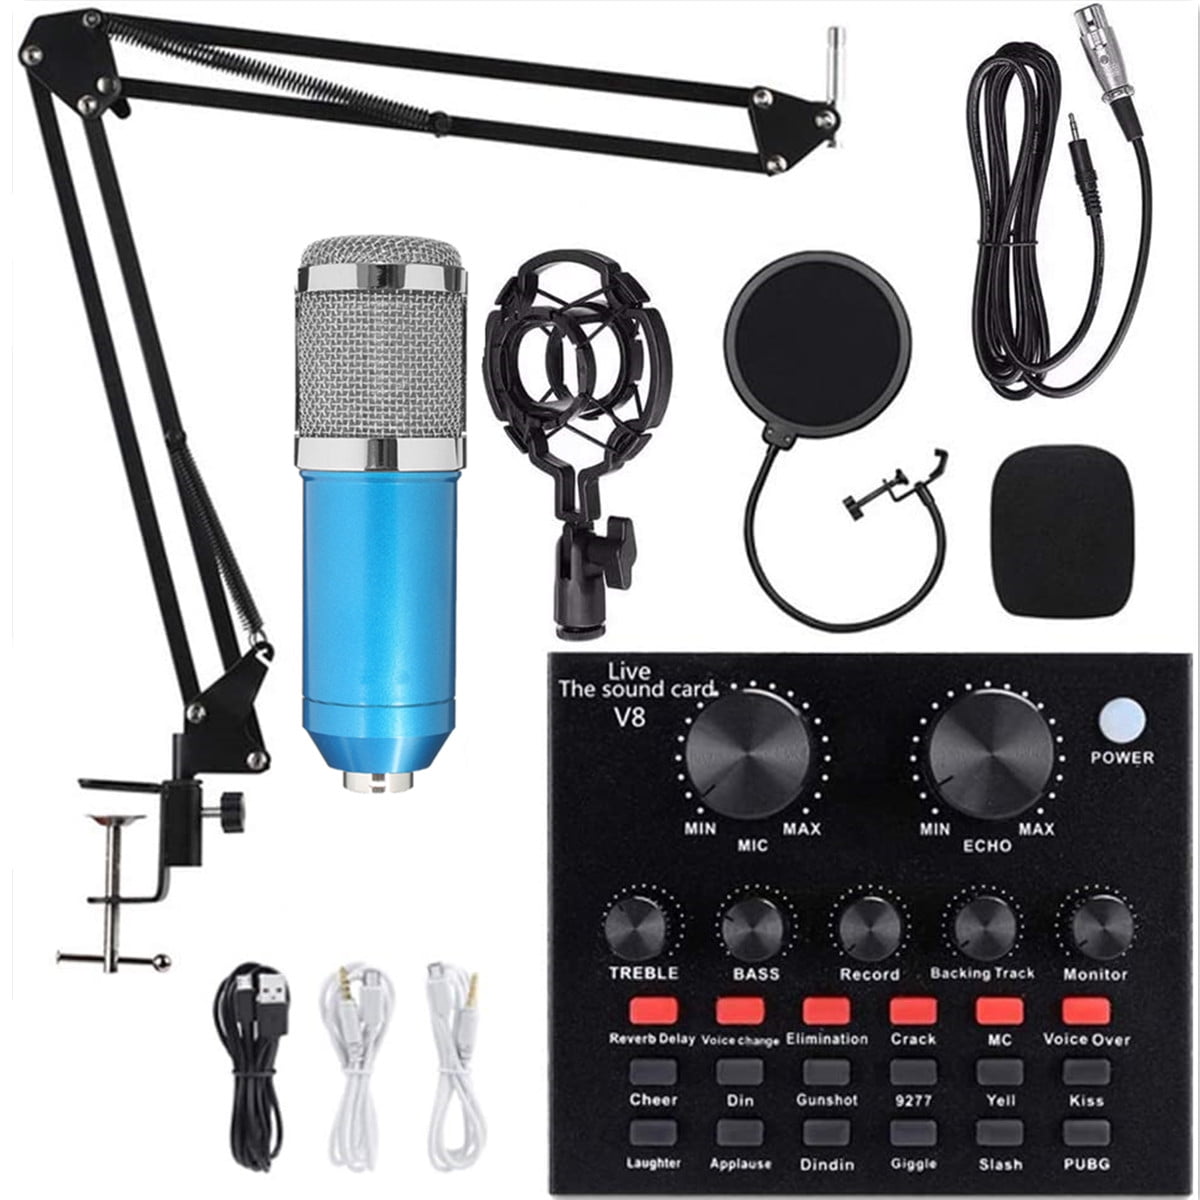 Podcasting Equipment and Packages  Shop Our Podcast Bundles, Kits,  Microphones, Headphones, Mixers, Interfaces, Acoustic Panels, Mic Booms,  Device Mounts and Accessories